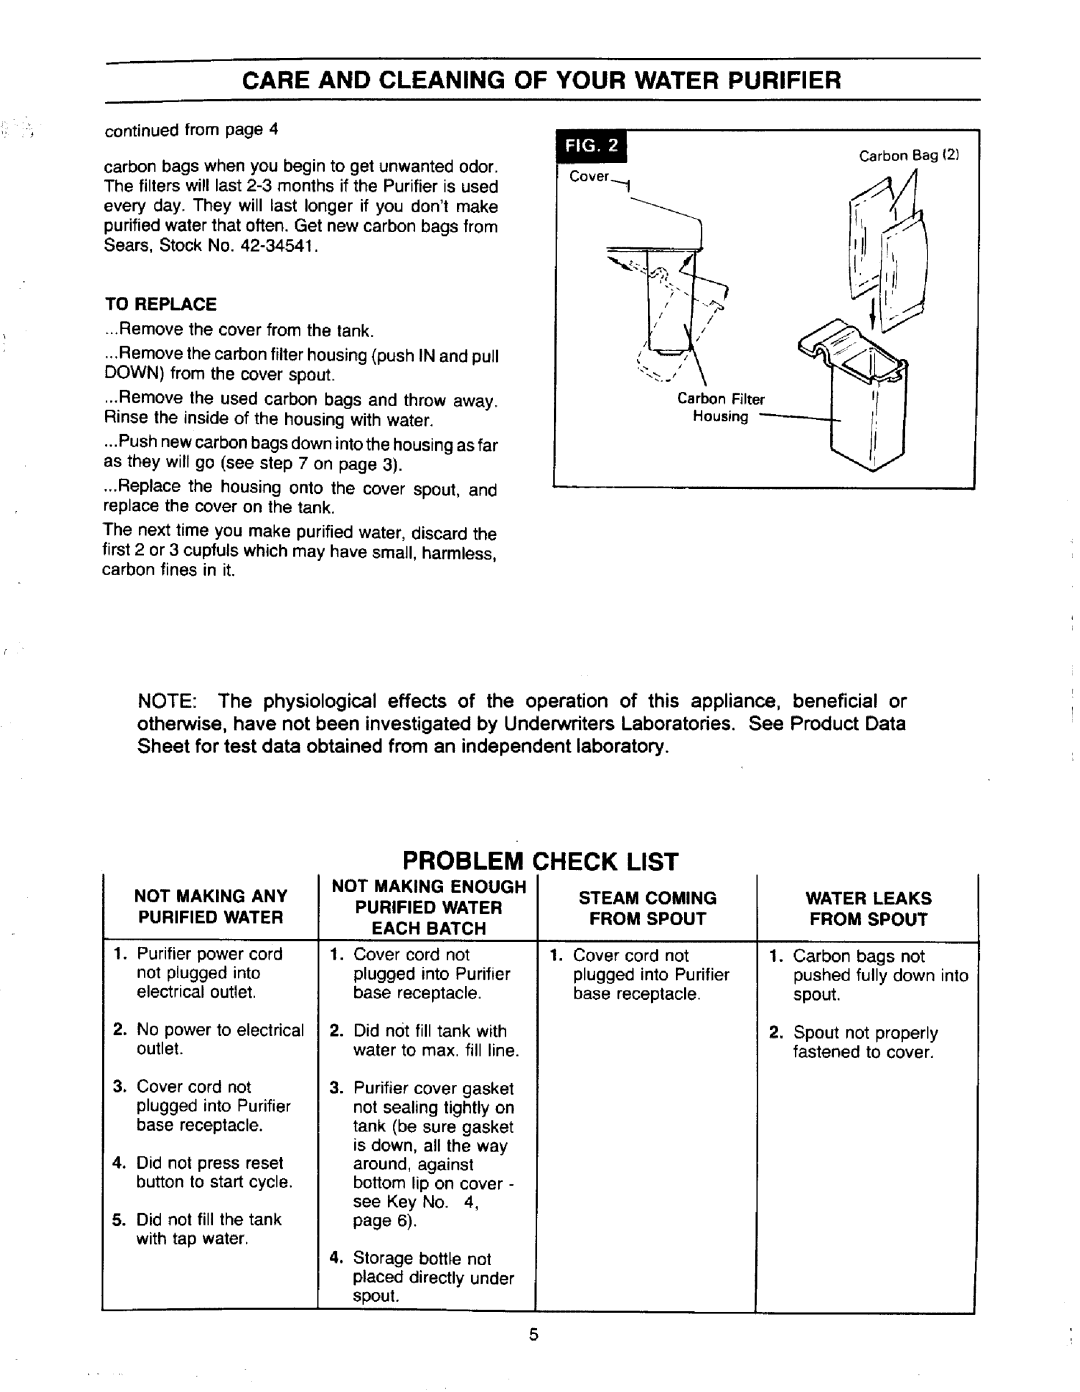 Sears 625.3444 owner manual Problem, Check List, Care And Cleaning Of Your Water Purifier 